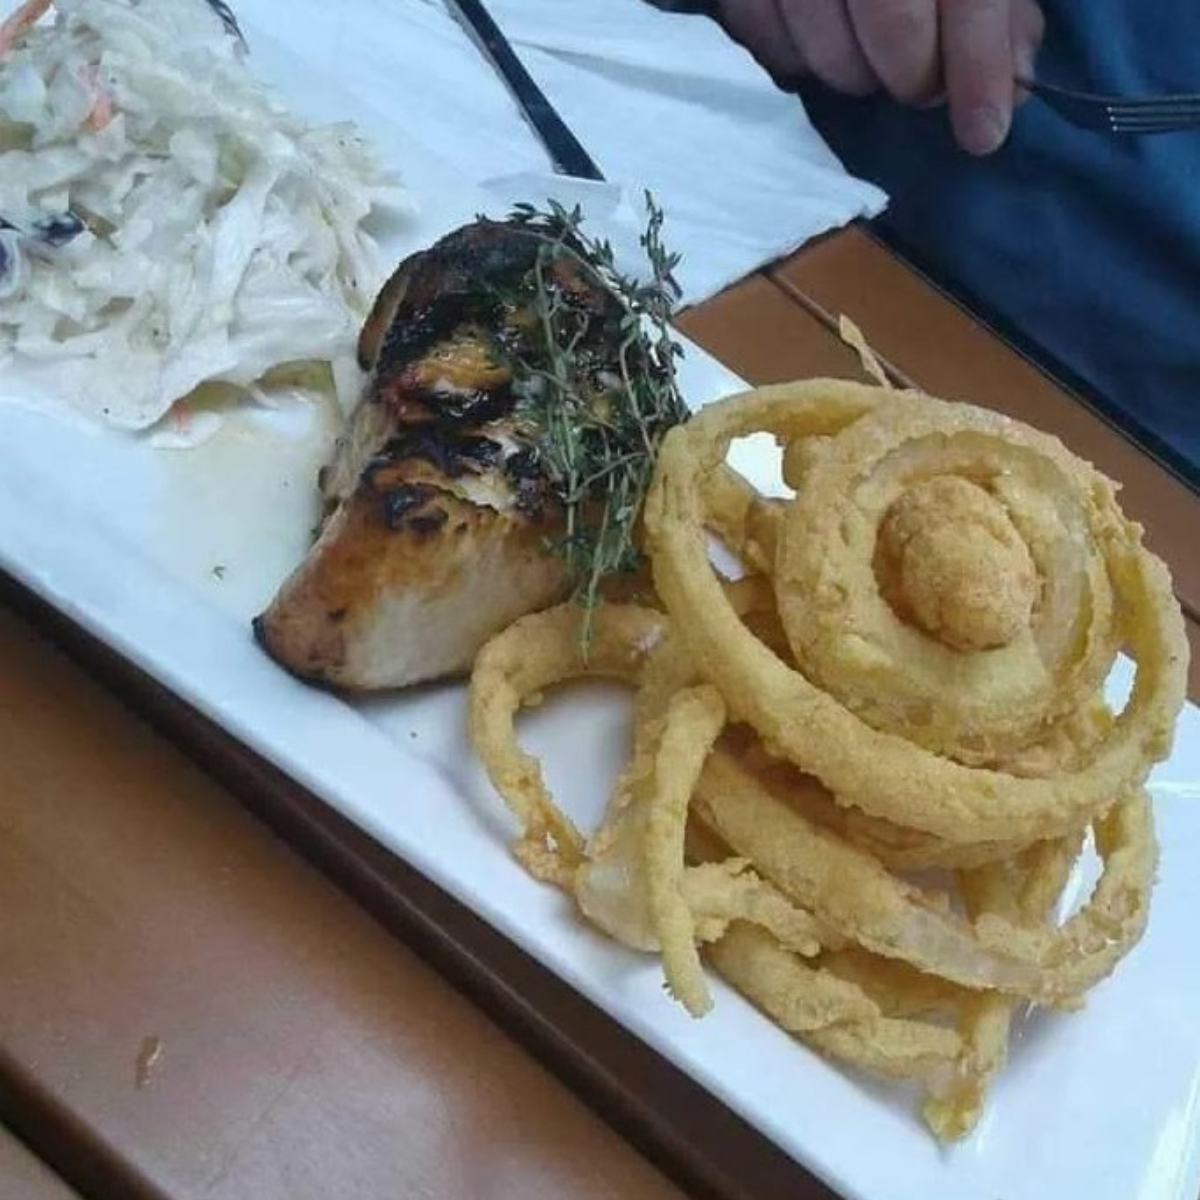 Some chicken steak and onion rings.